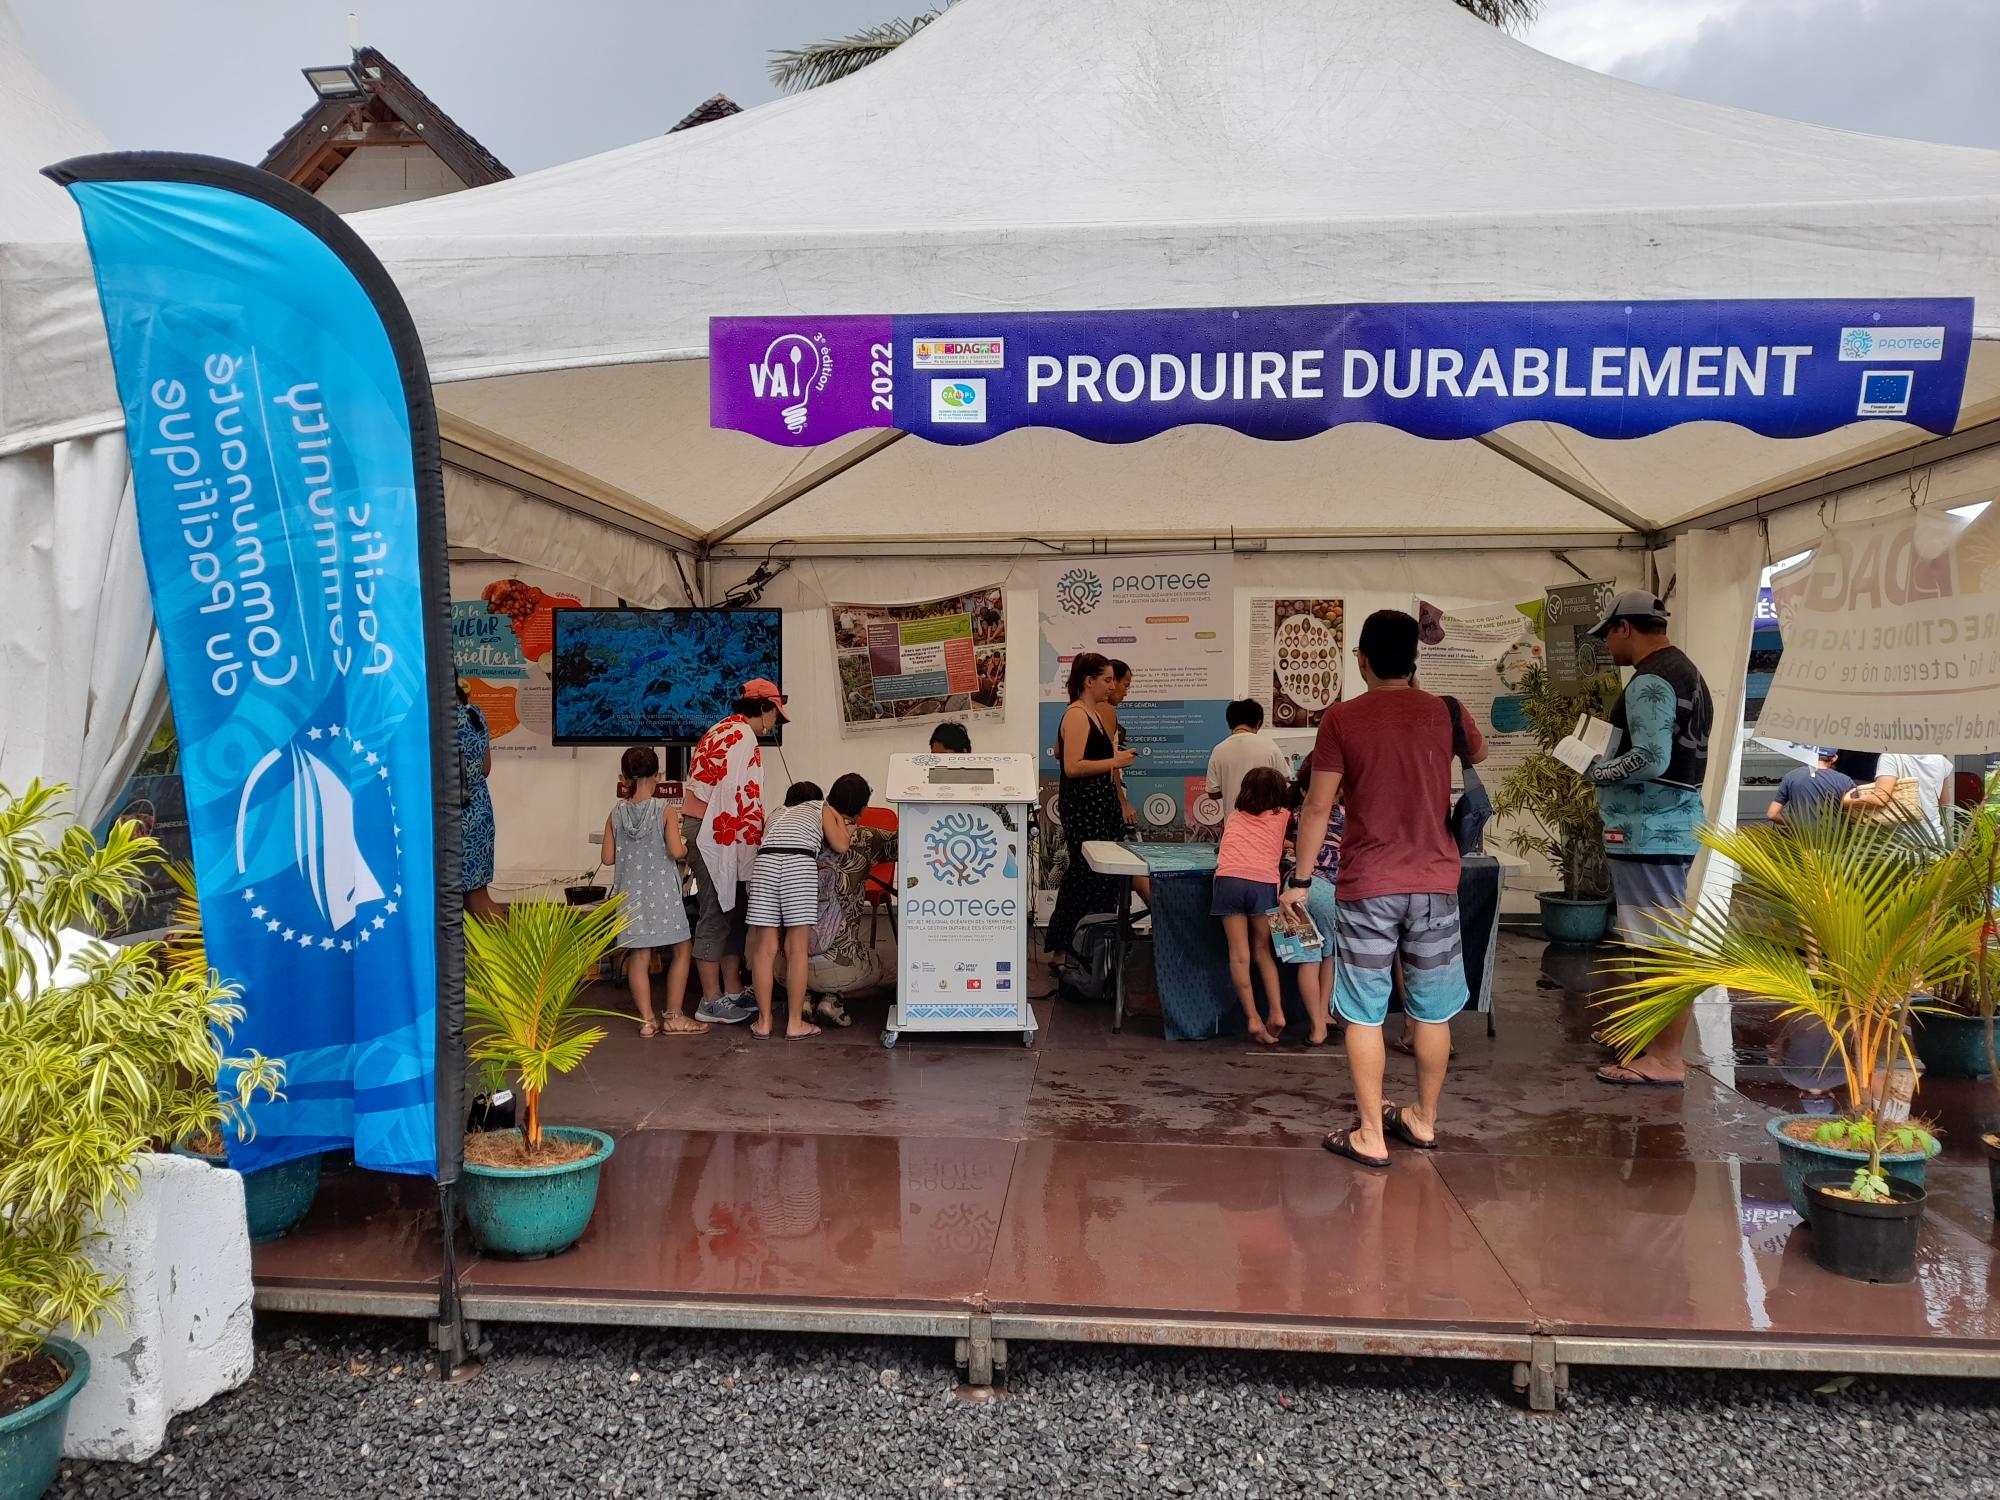 A joint stand between the Department of Agriculture, the Department of Marine Resources and the Department of Health of French Polynesia and the Pacific Community